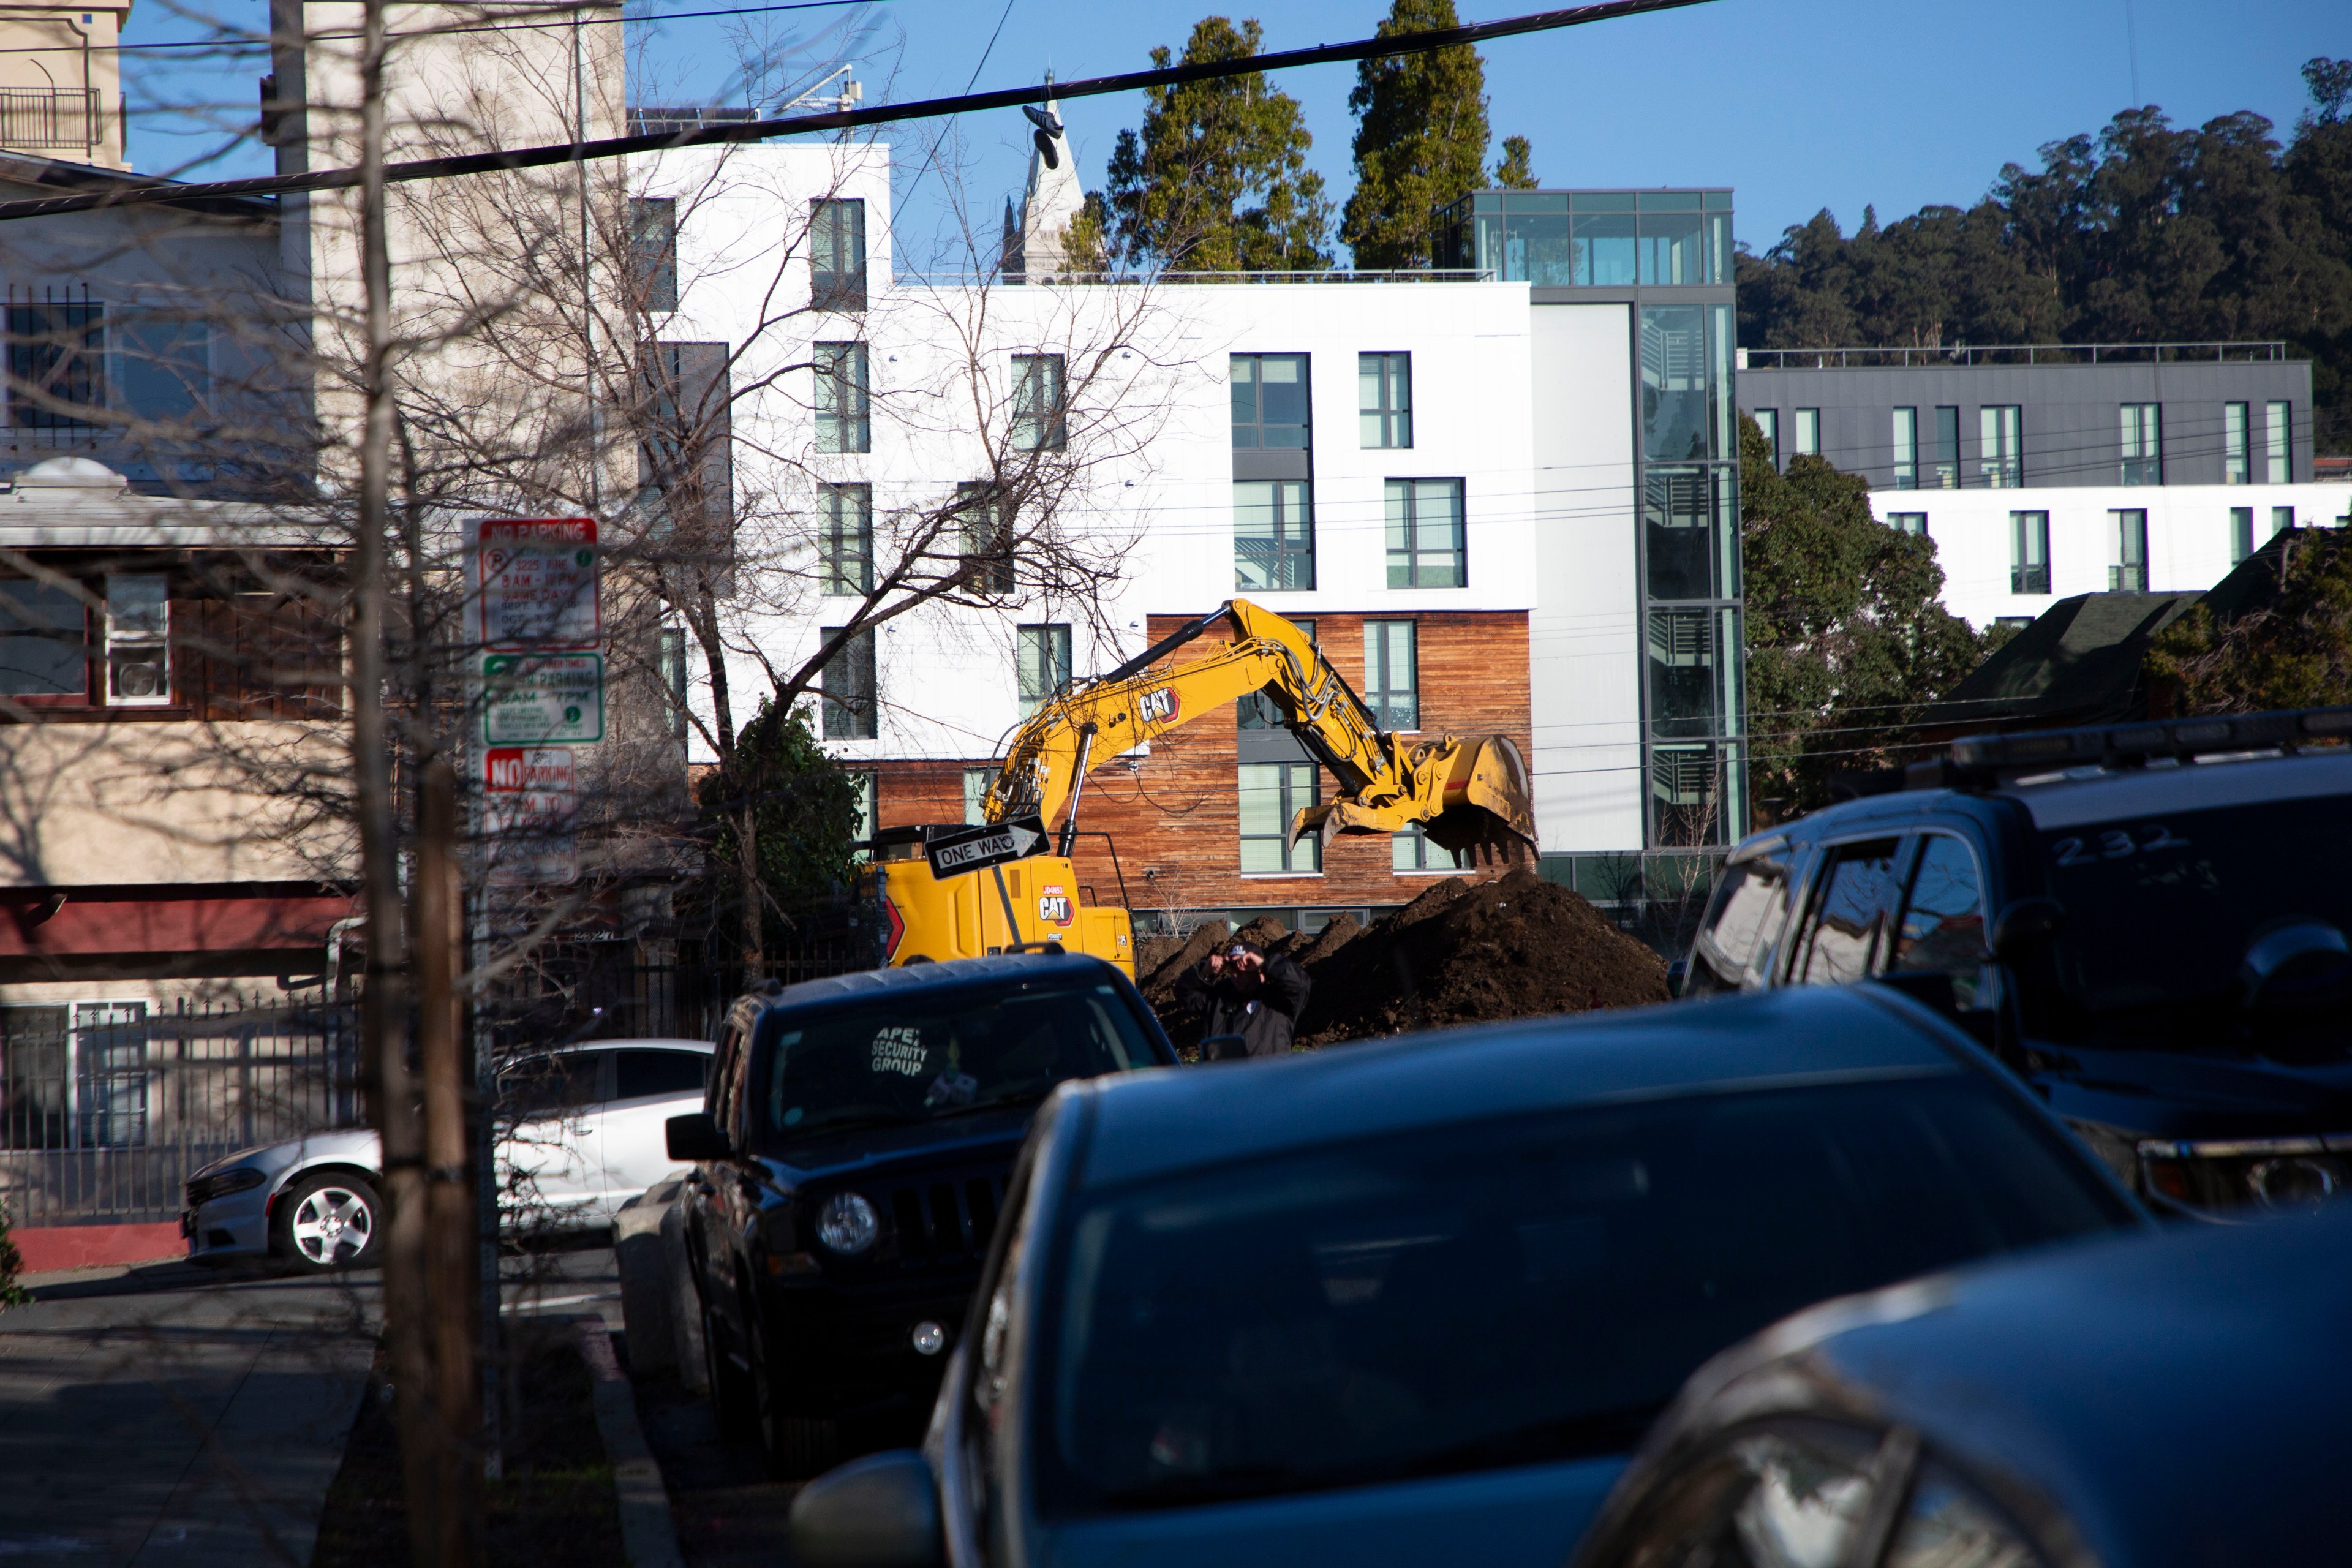 An excavator can be seen in the distance as it begins construction at the Peoples Park.